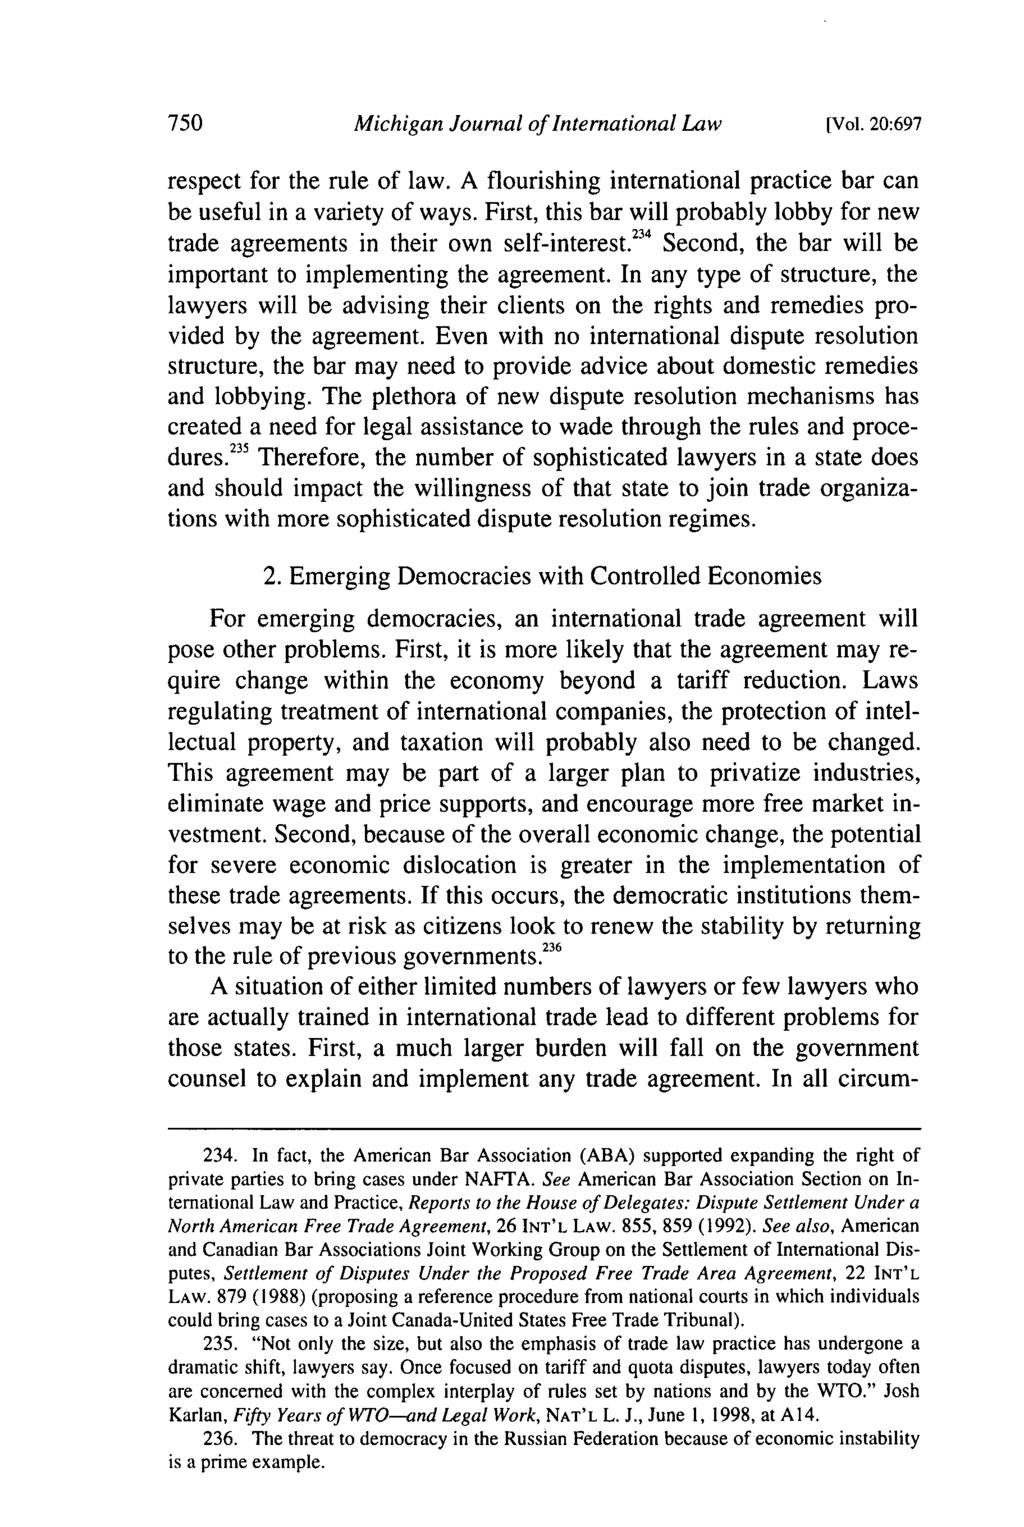 Michigan Journal of International Law [Vol. 20:697 respect for the rule of law. A flourishing international practice bar can be useful in a variety of ways.